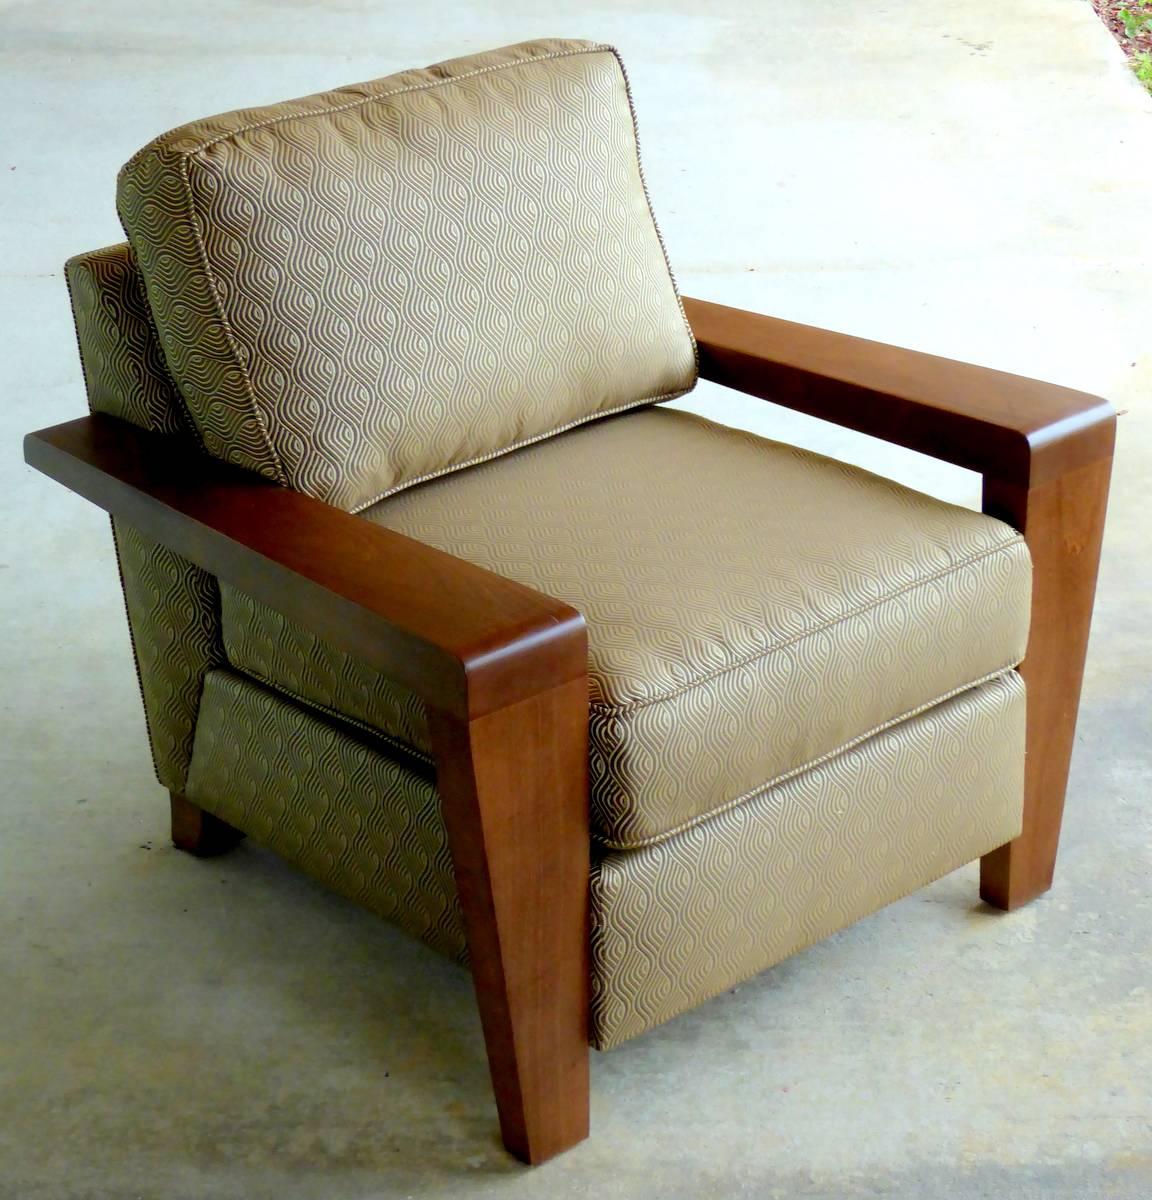 The arms become legs in an extraordinary dual-taper design on this rare Jackson upholstered lounge chair by Thayer Coggin. Pure quality, comfort, and style.

We happen to have an extra set of cushions, a pair of rear legs, and some spare fabric,